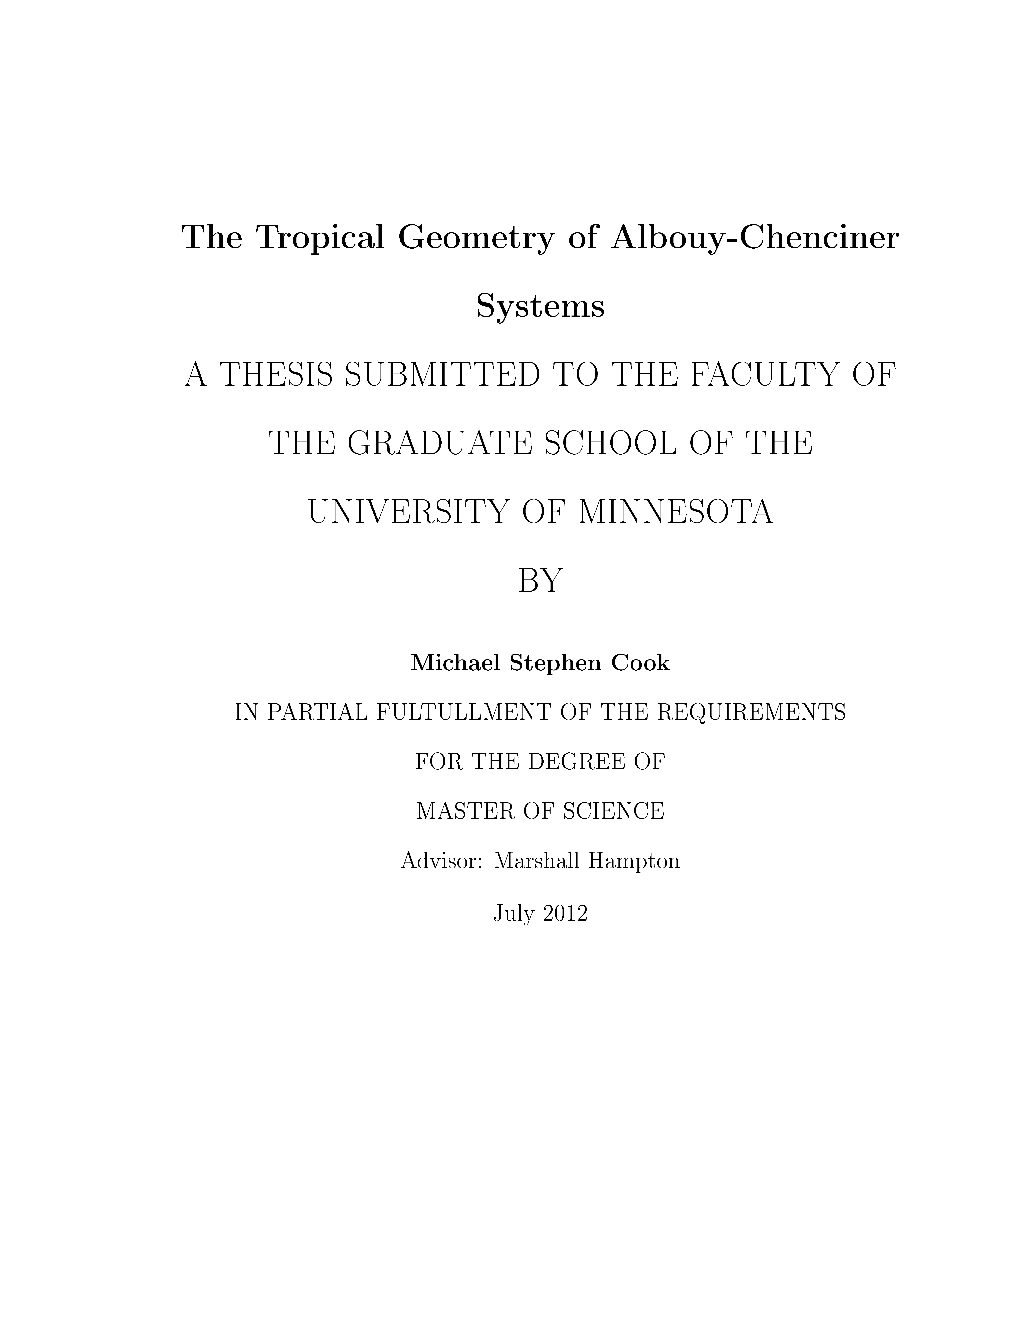 The Tropical Geometry of Albouy-Chenciner Systems a THESIS SUBMITTED to the FACULTY of the GRADUATE SCHOOL of the UNIVERSITY of MINNESOTA BY